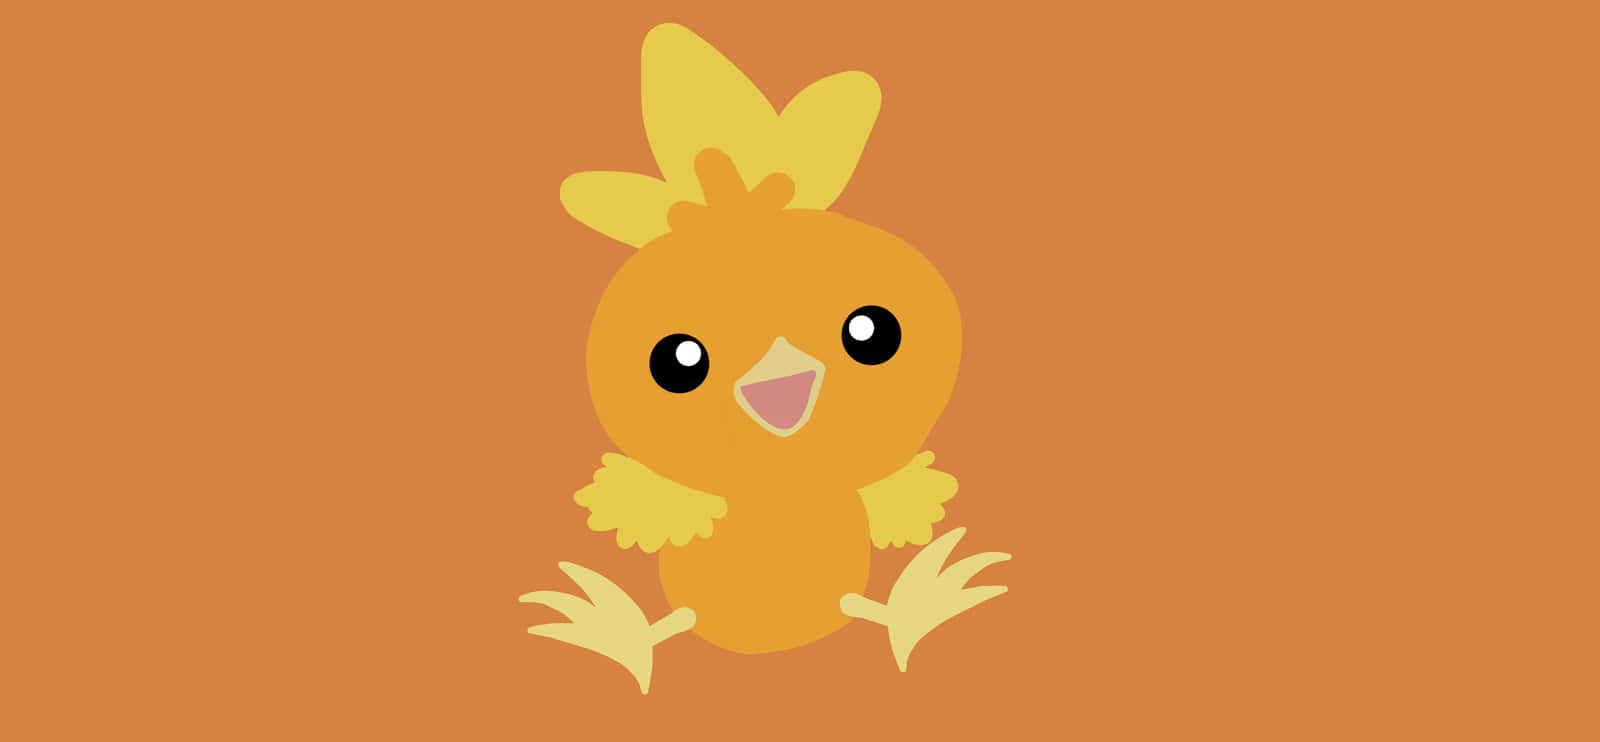 Cute Torchic Illustration With Orange Background Wallpaper